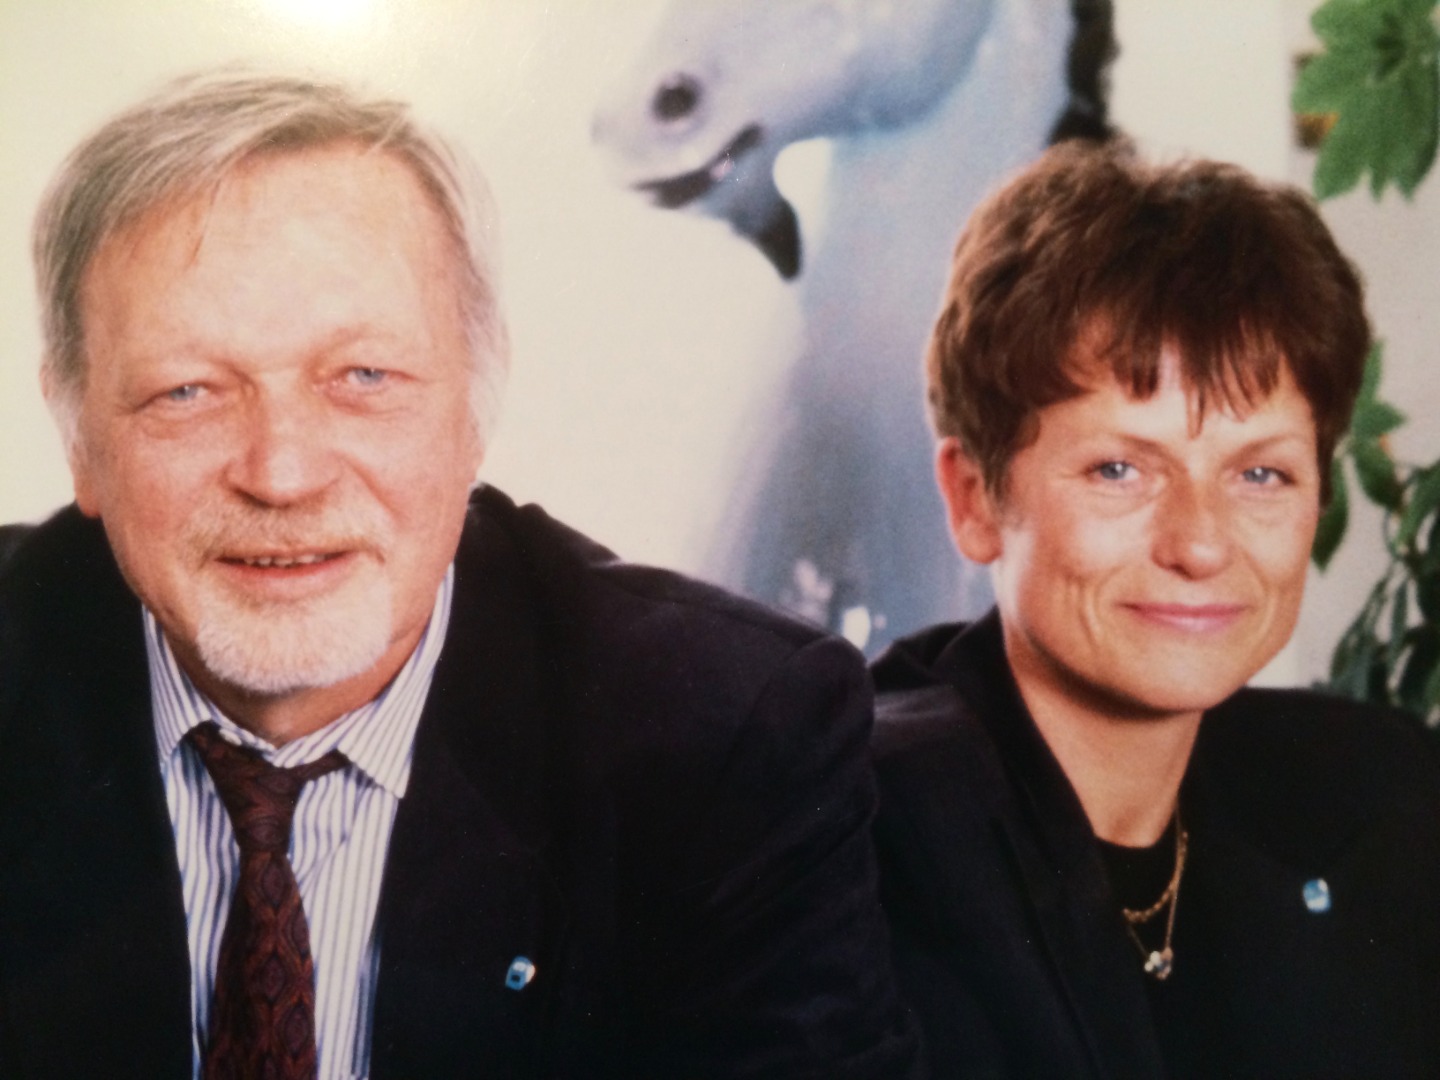 View the biography of Fritz W. Borgstedt and Rosemarie Borgstedt